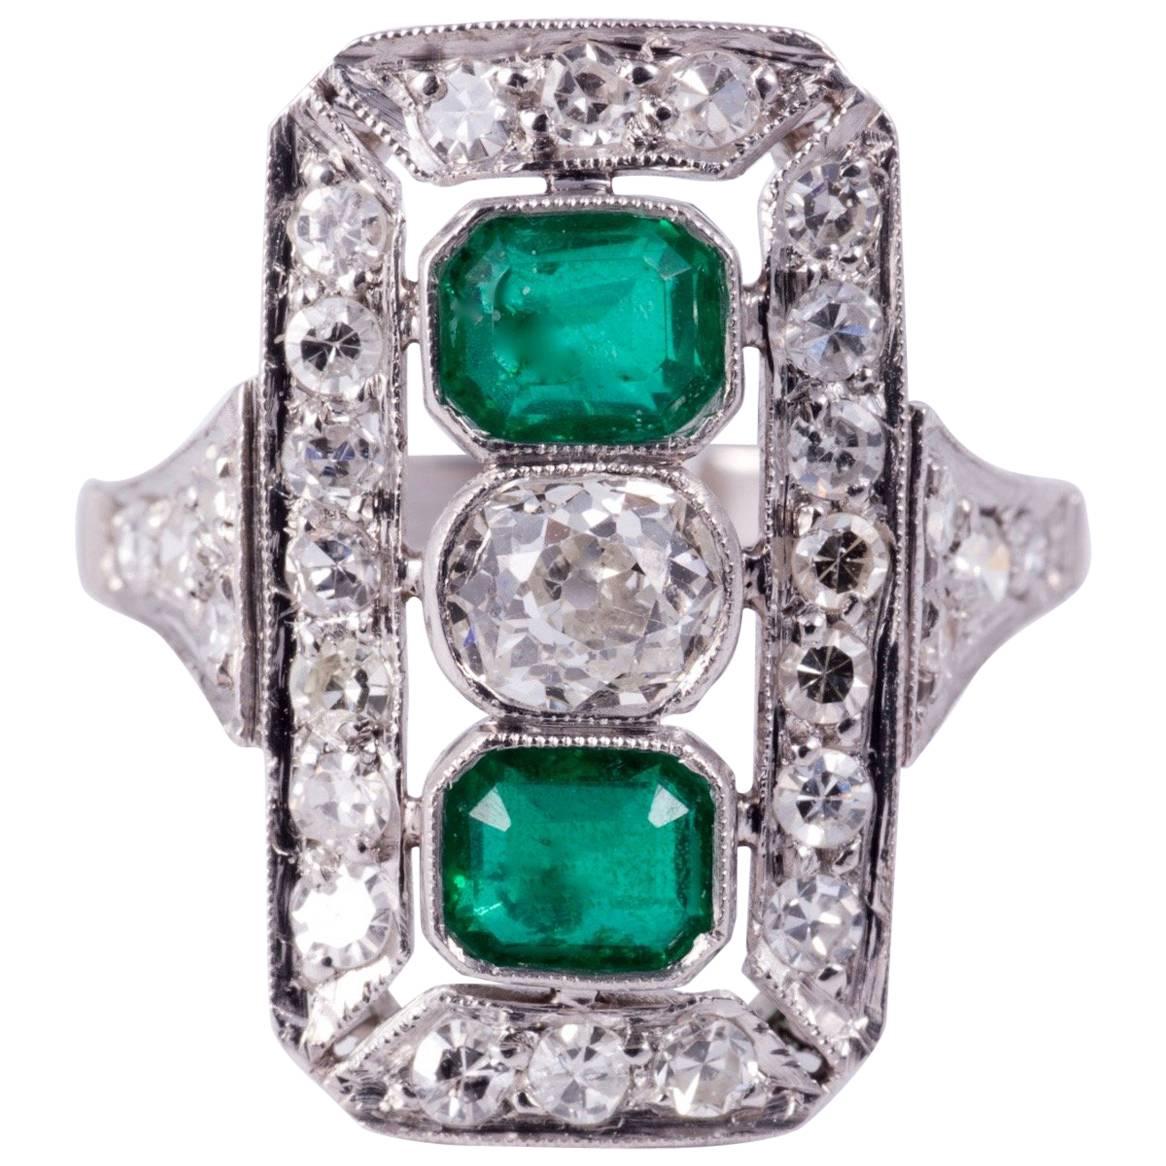  Art Deco Emerald and Diamond Cocktail Ring 